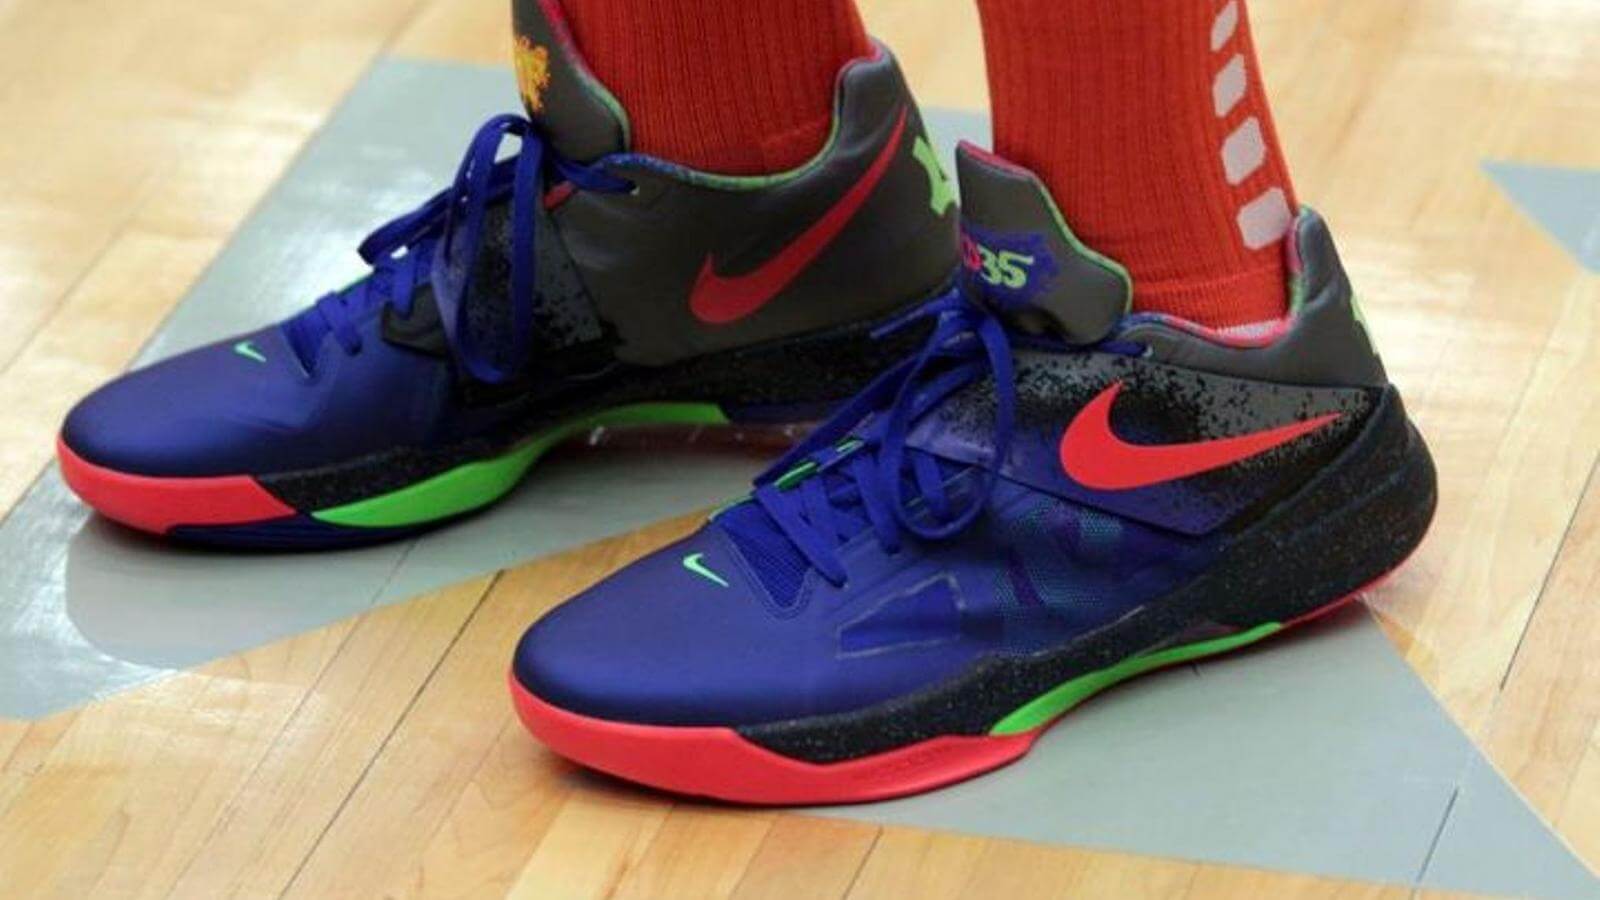 coolest kd basketball shoes